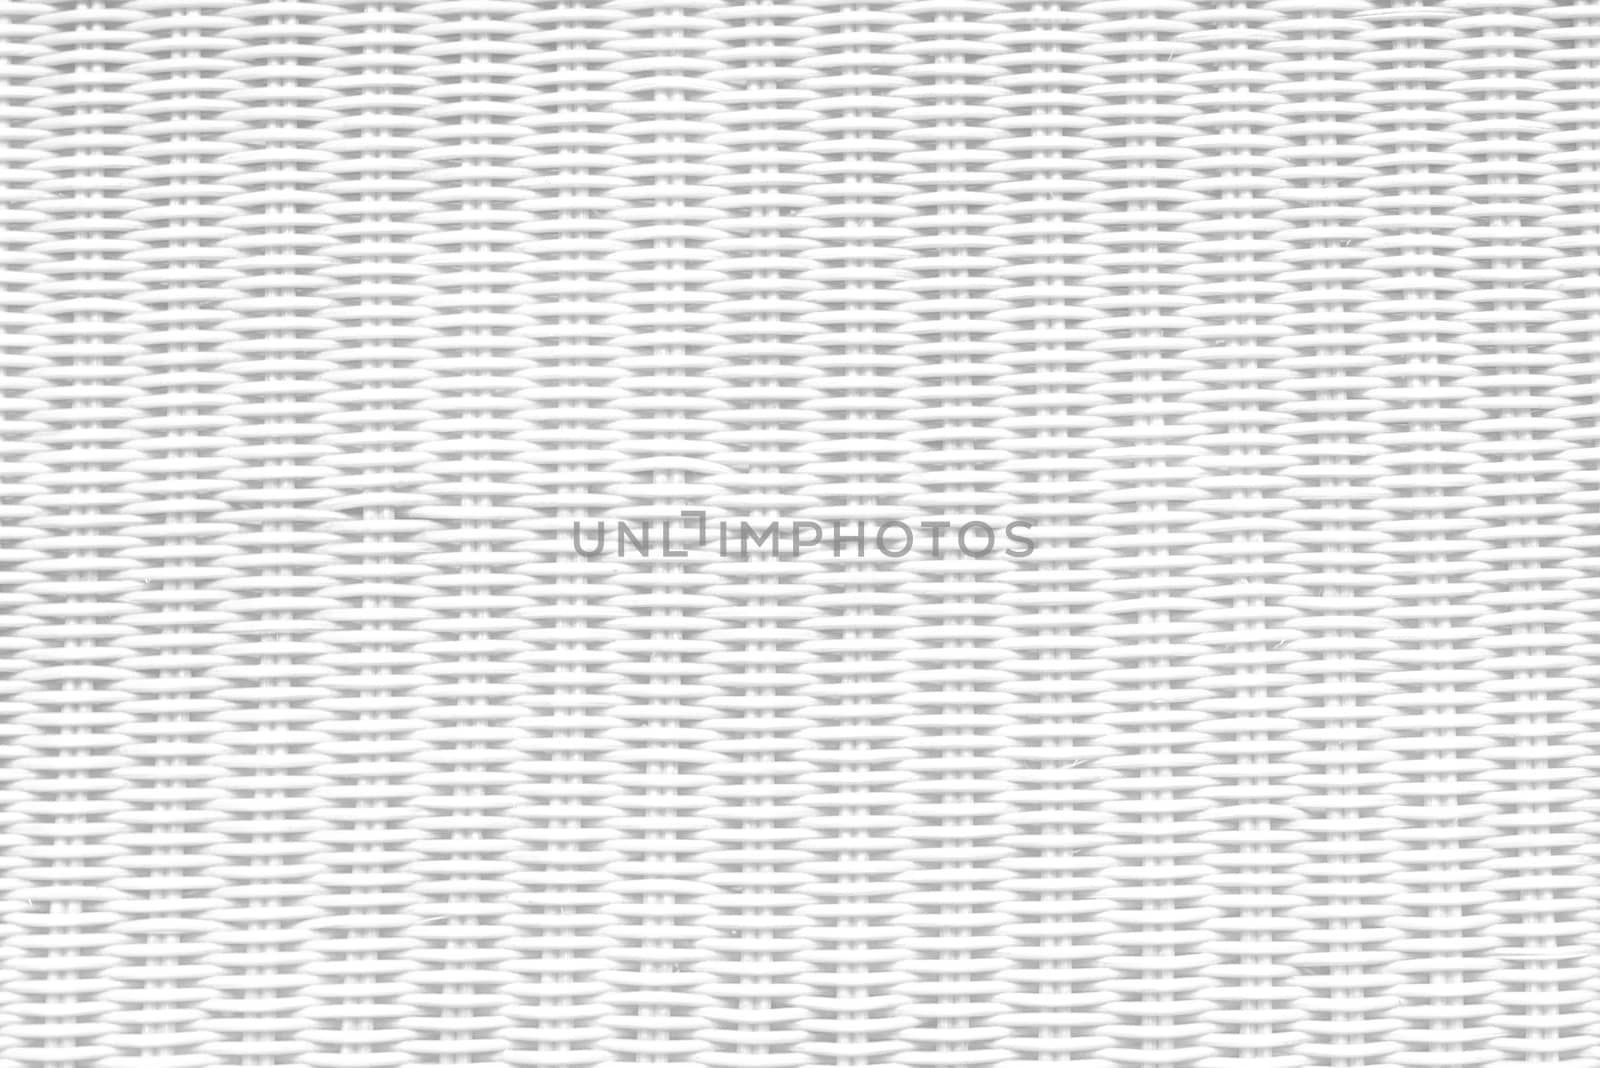 White Weave Basket Background. by mesamong